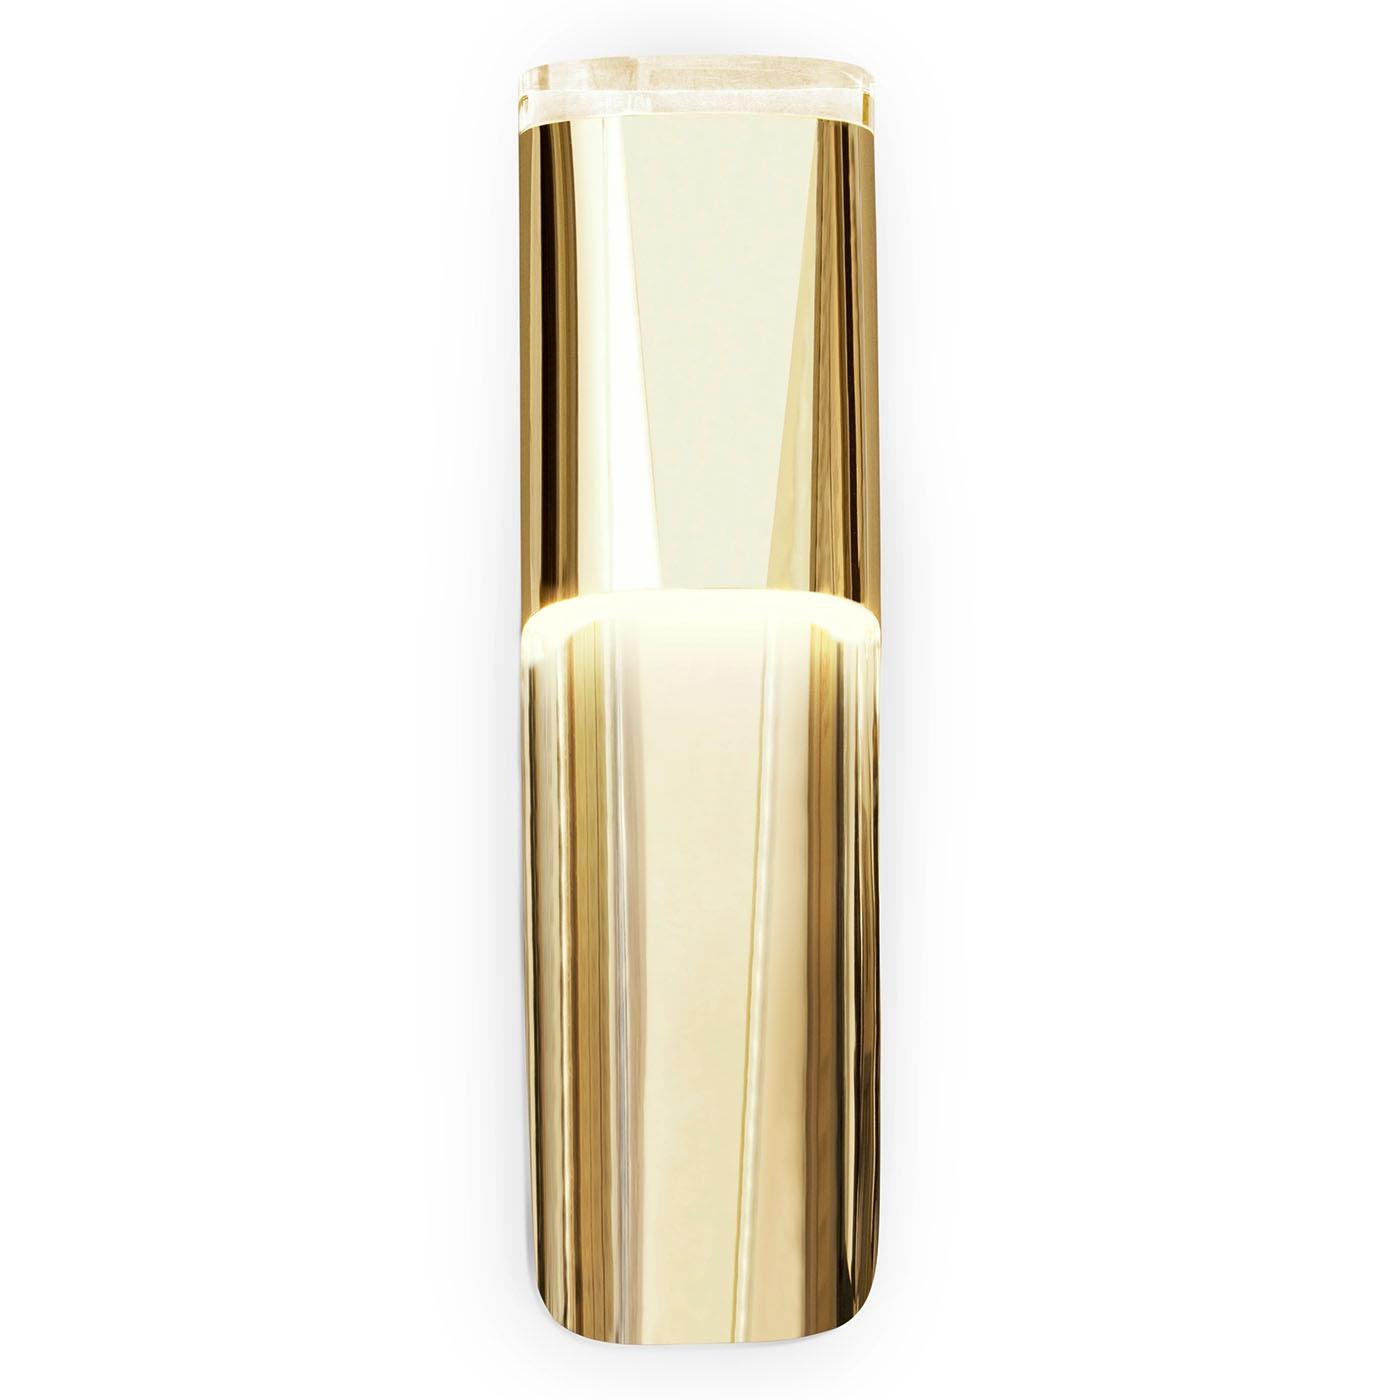 Wall lamp grand Palais with brass structure in
gold plated finish, with acrylic top shade.